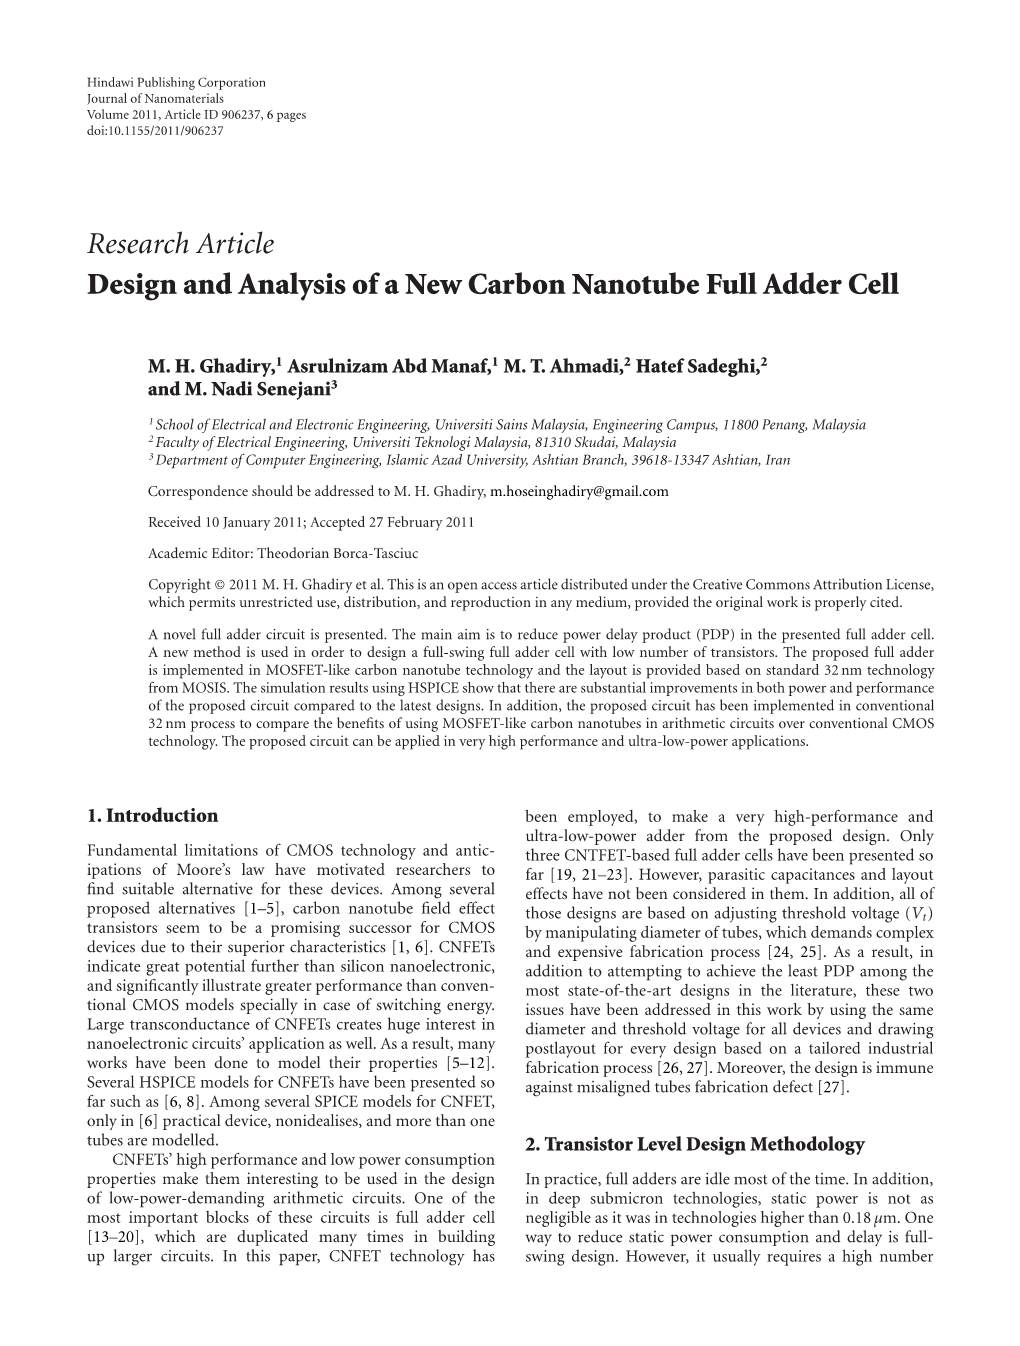 Design and Analysis of a New Carbon Nanotube Full Adder Cell